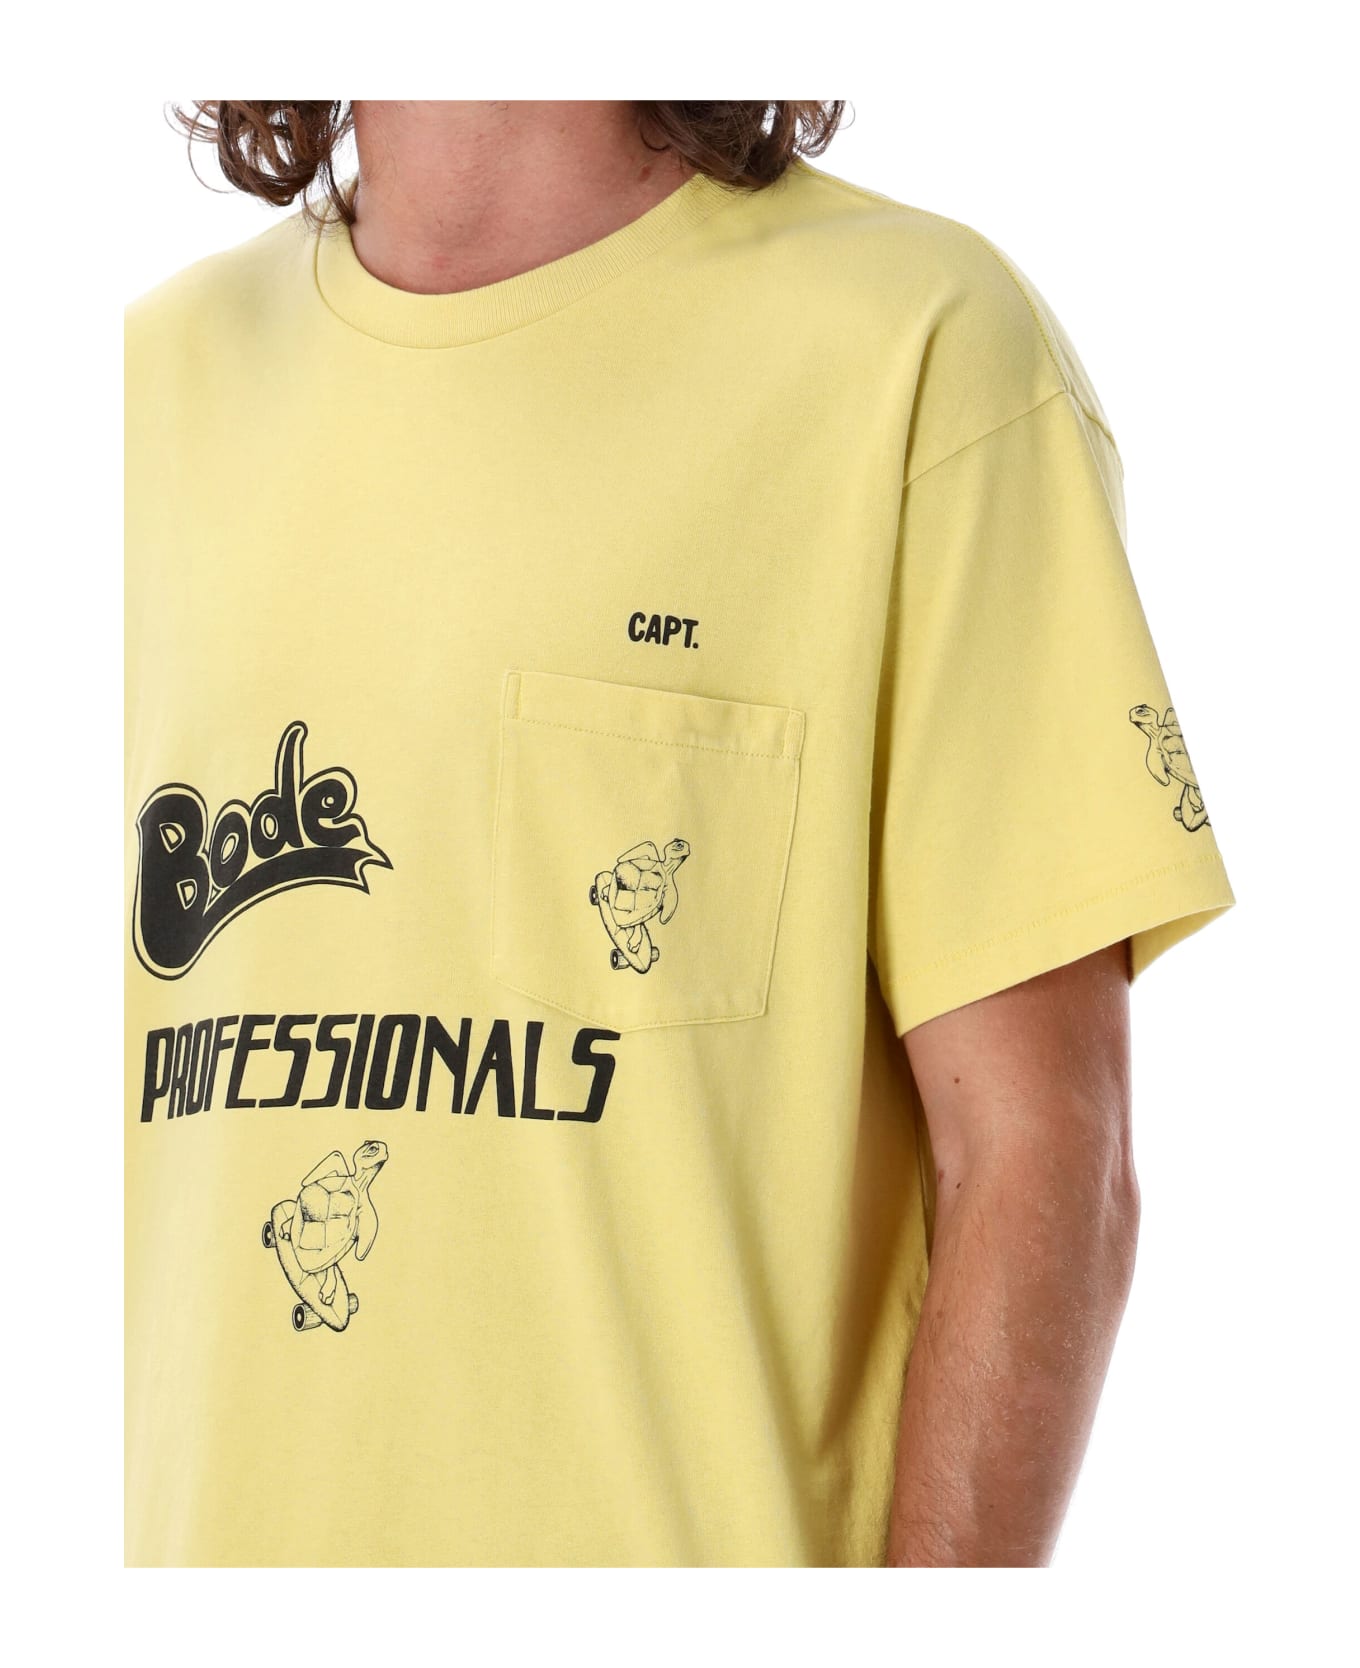 Bode Professionals Tee - YELLOW